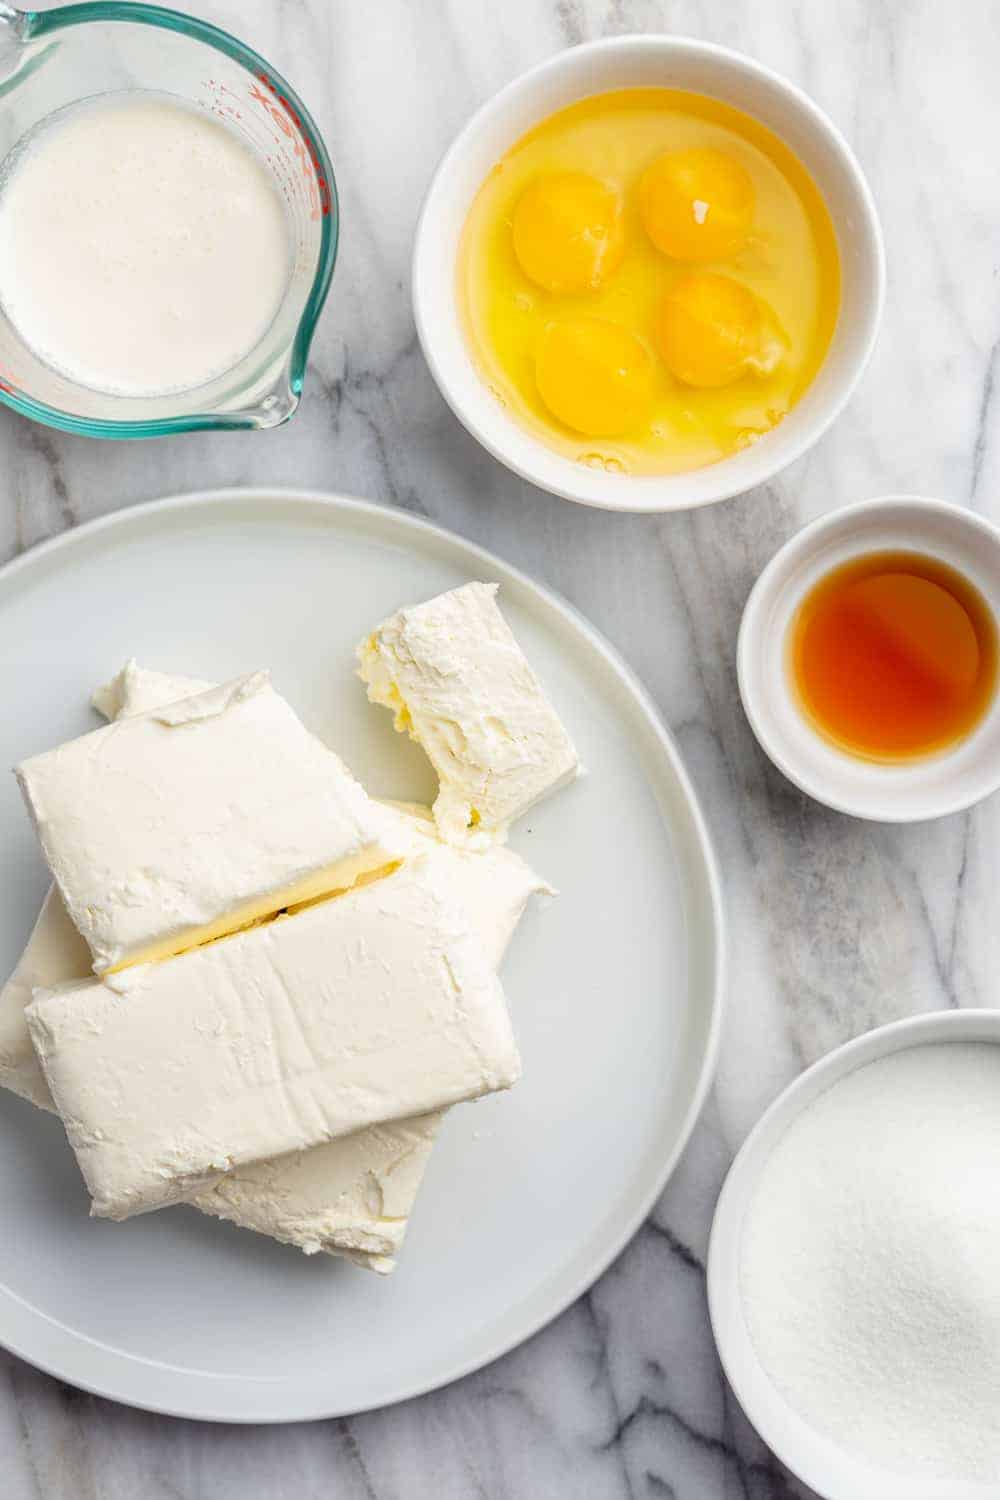 Blocks of cream cheese on a white plate, surrounded by cheesecake ingredients